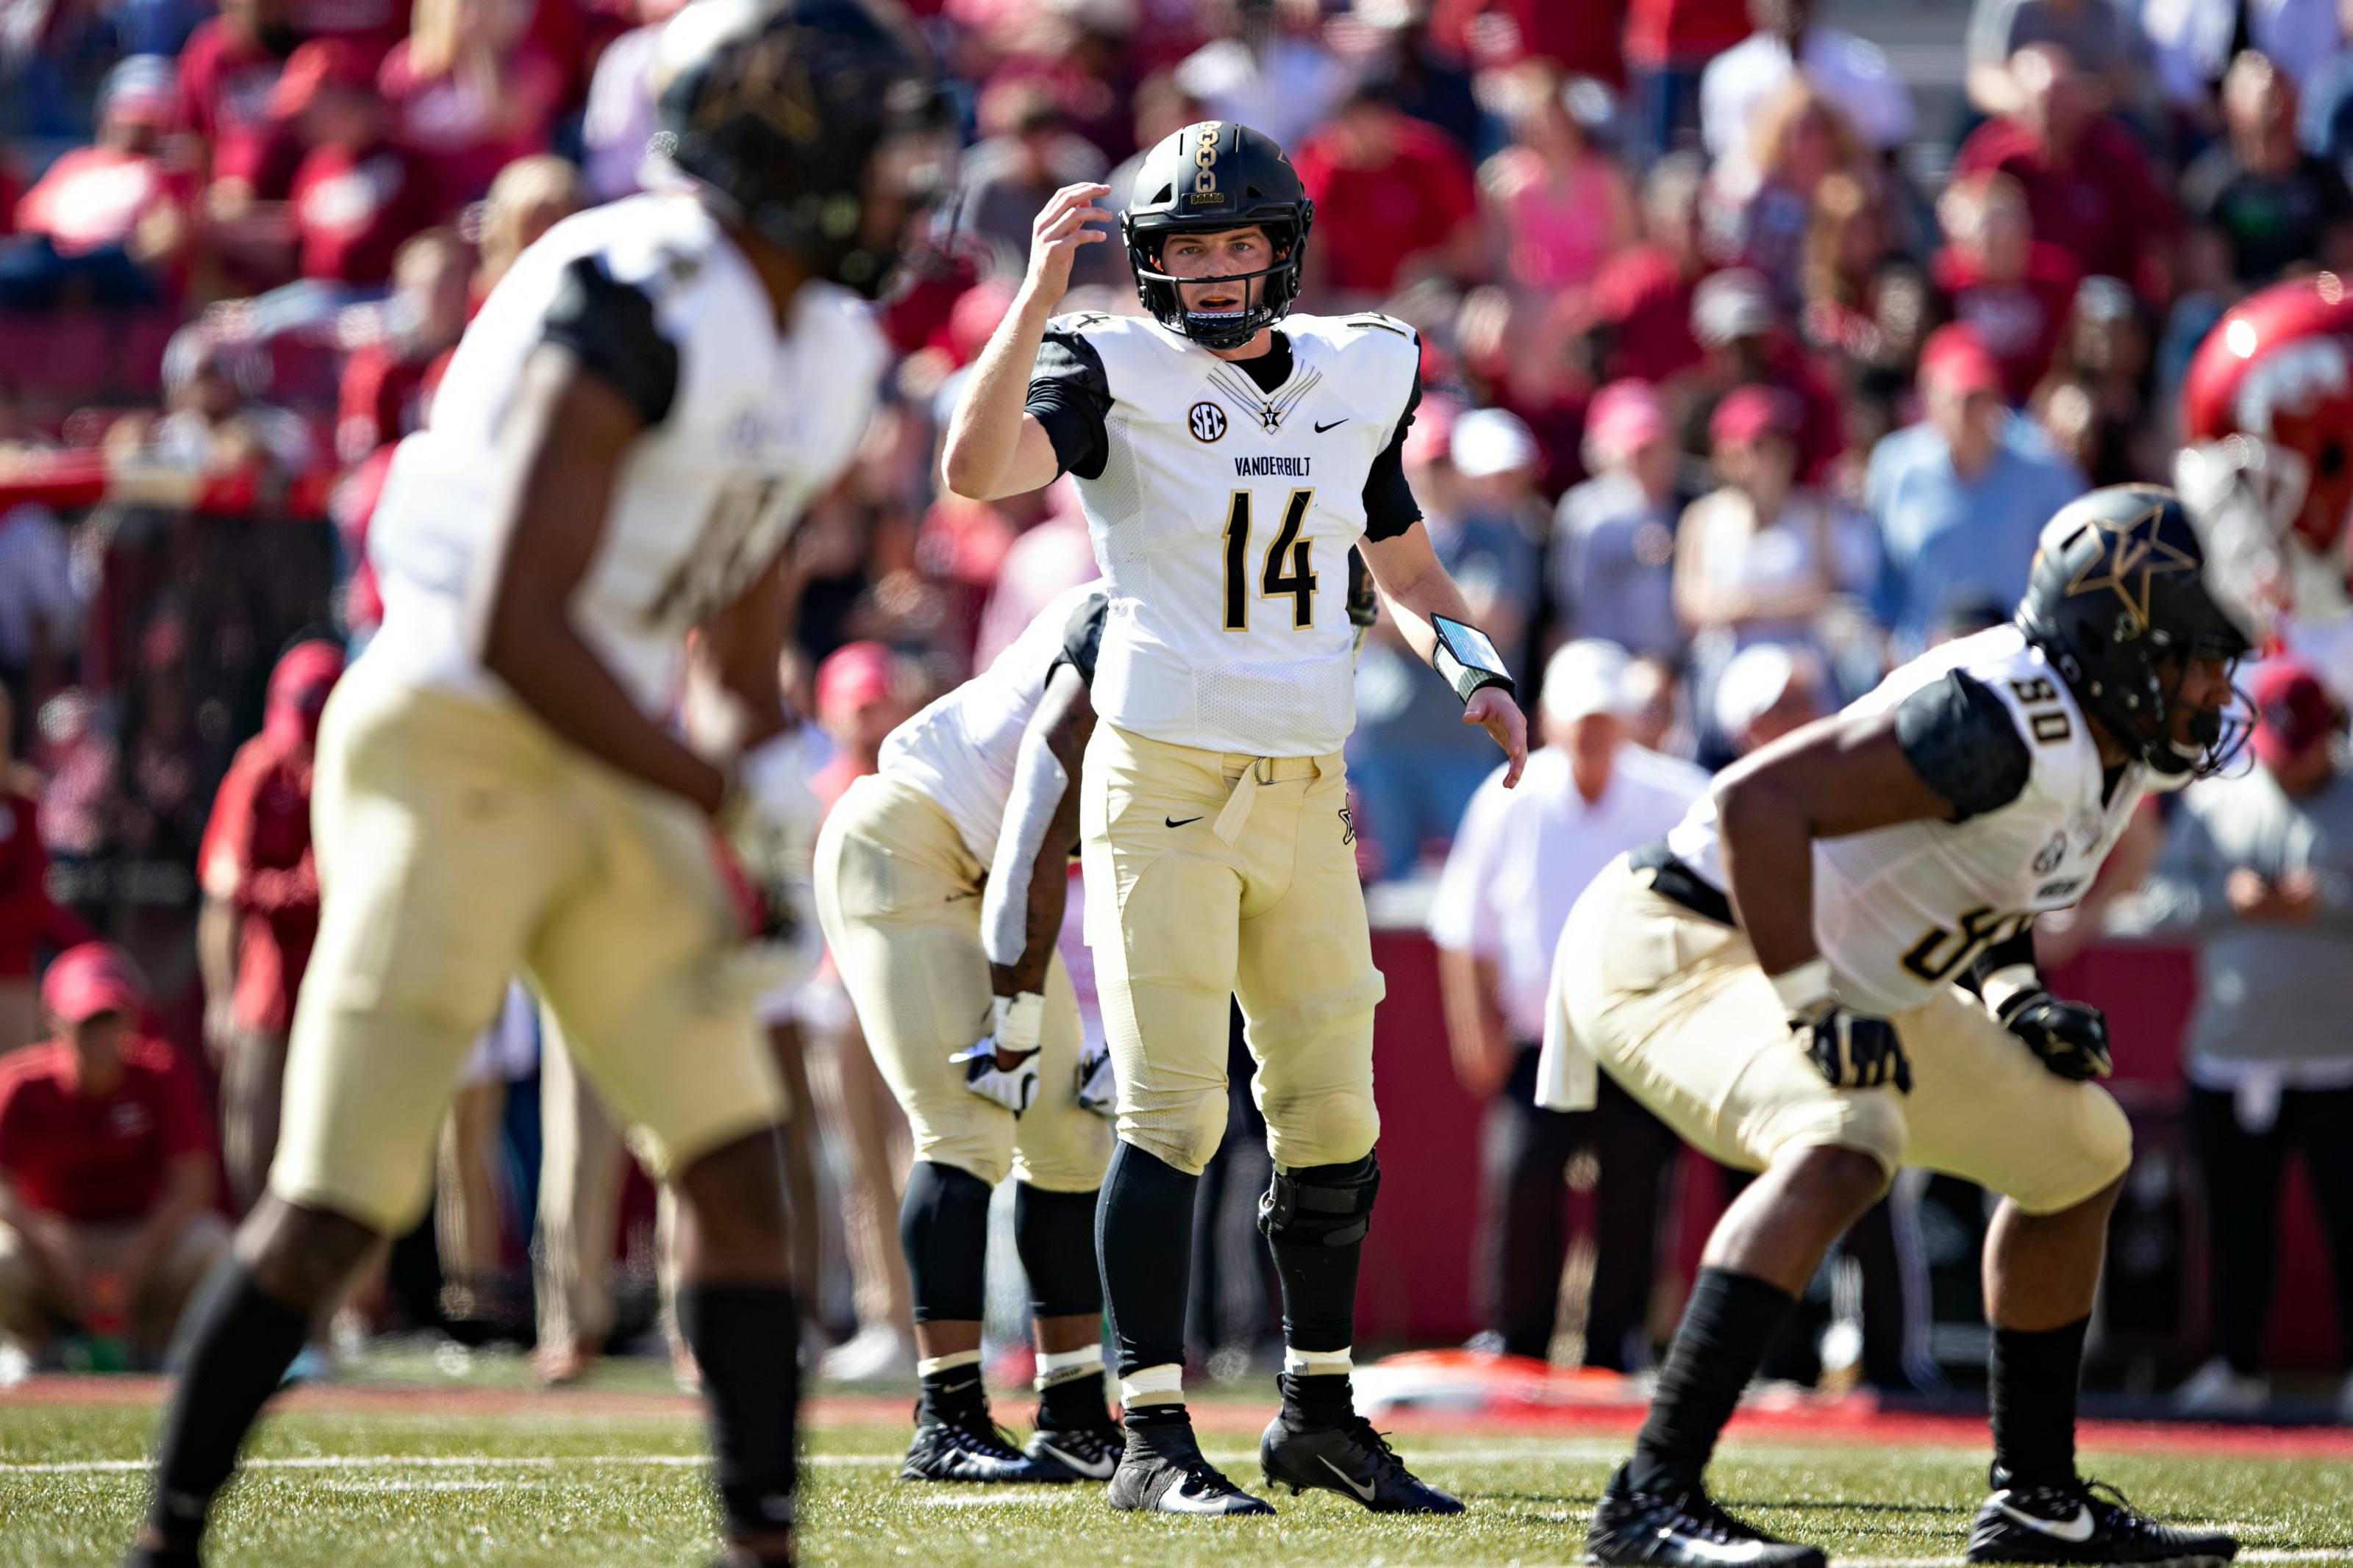 Vanderbilt Football Stat Leaders for the Commodores at the bye week